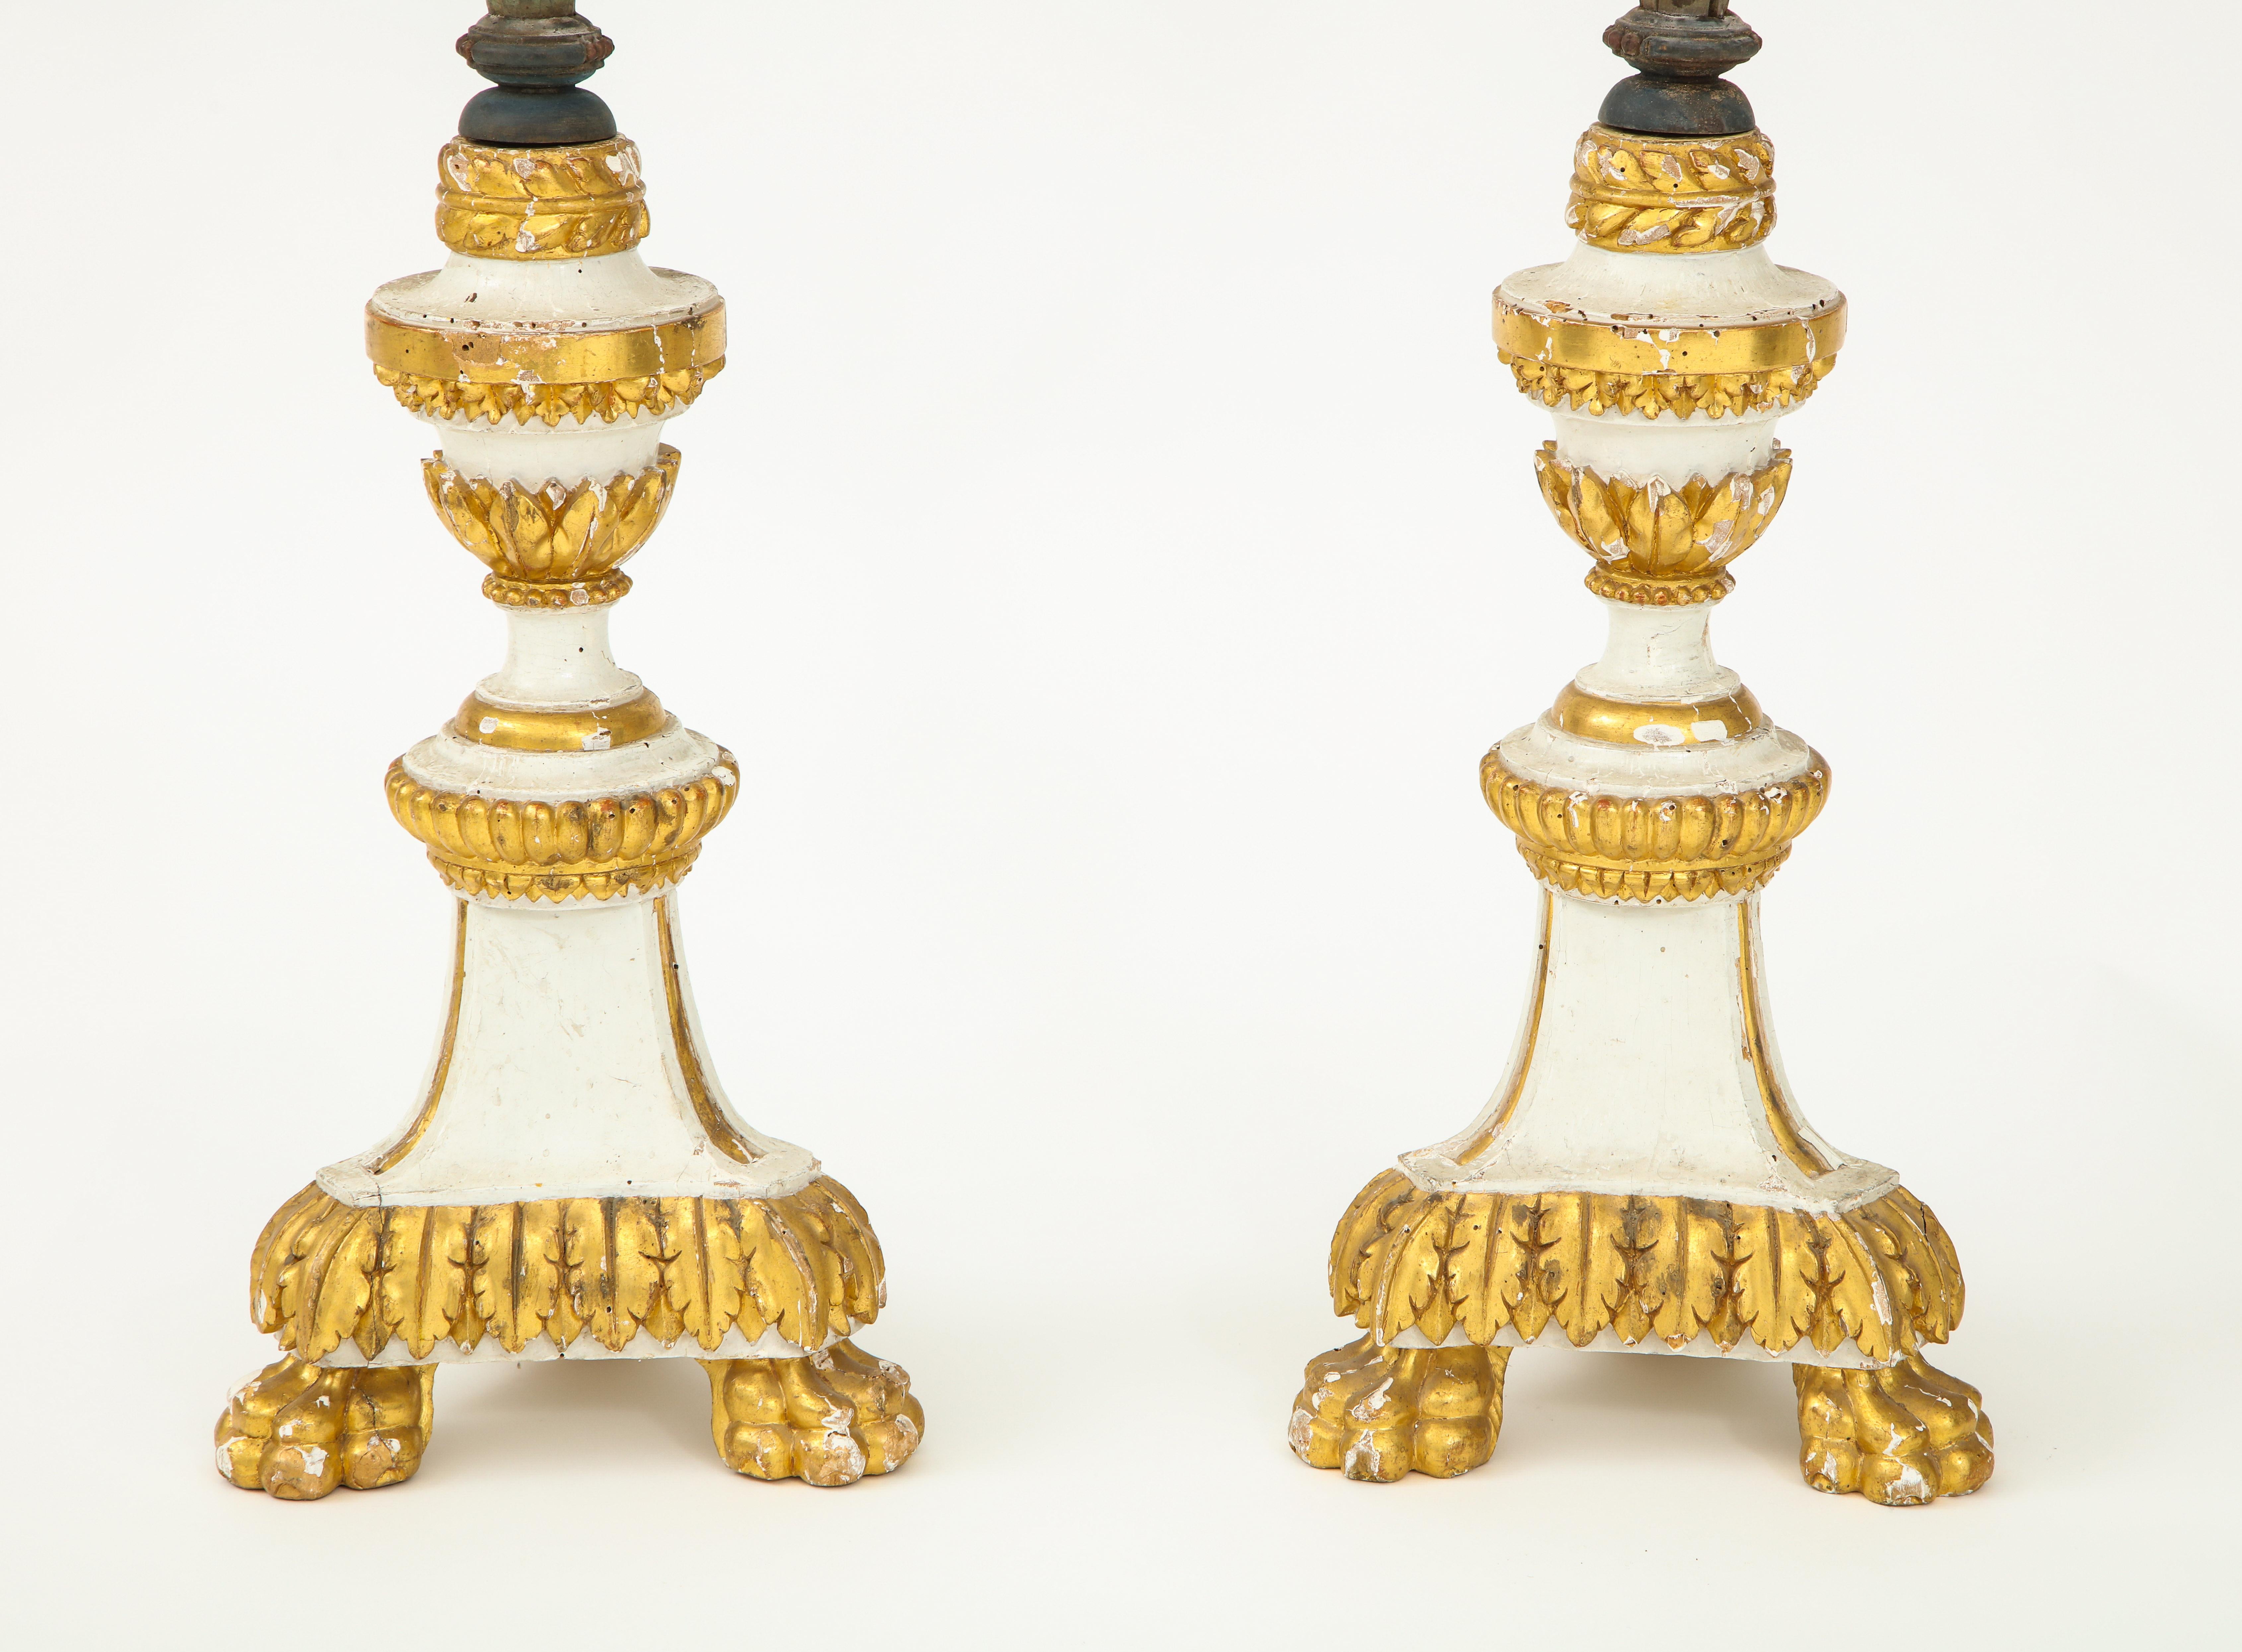 Pair of White and Giltwood Pricket Altar Candlesticks (Holz) im Angebot